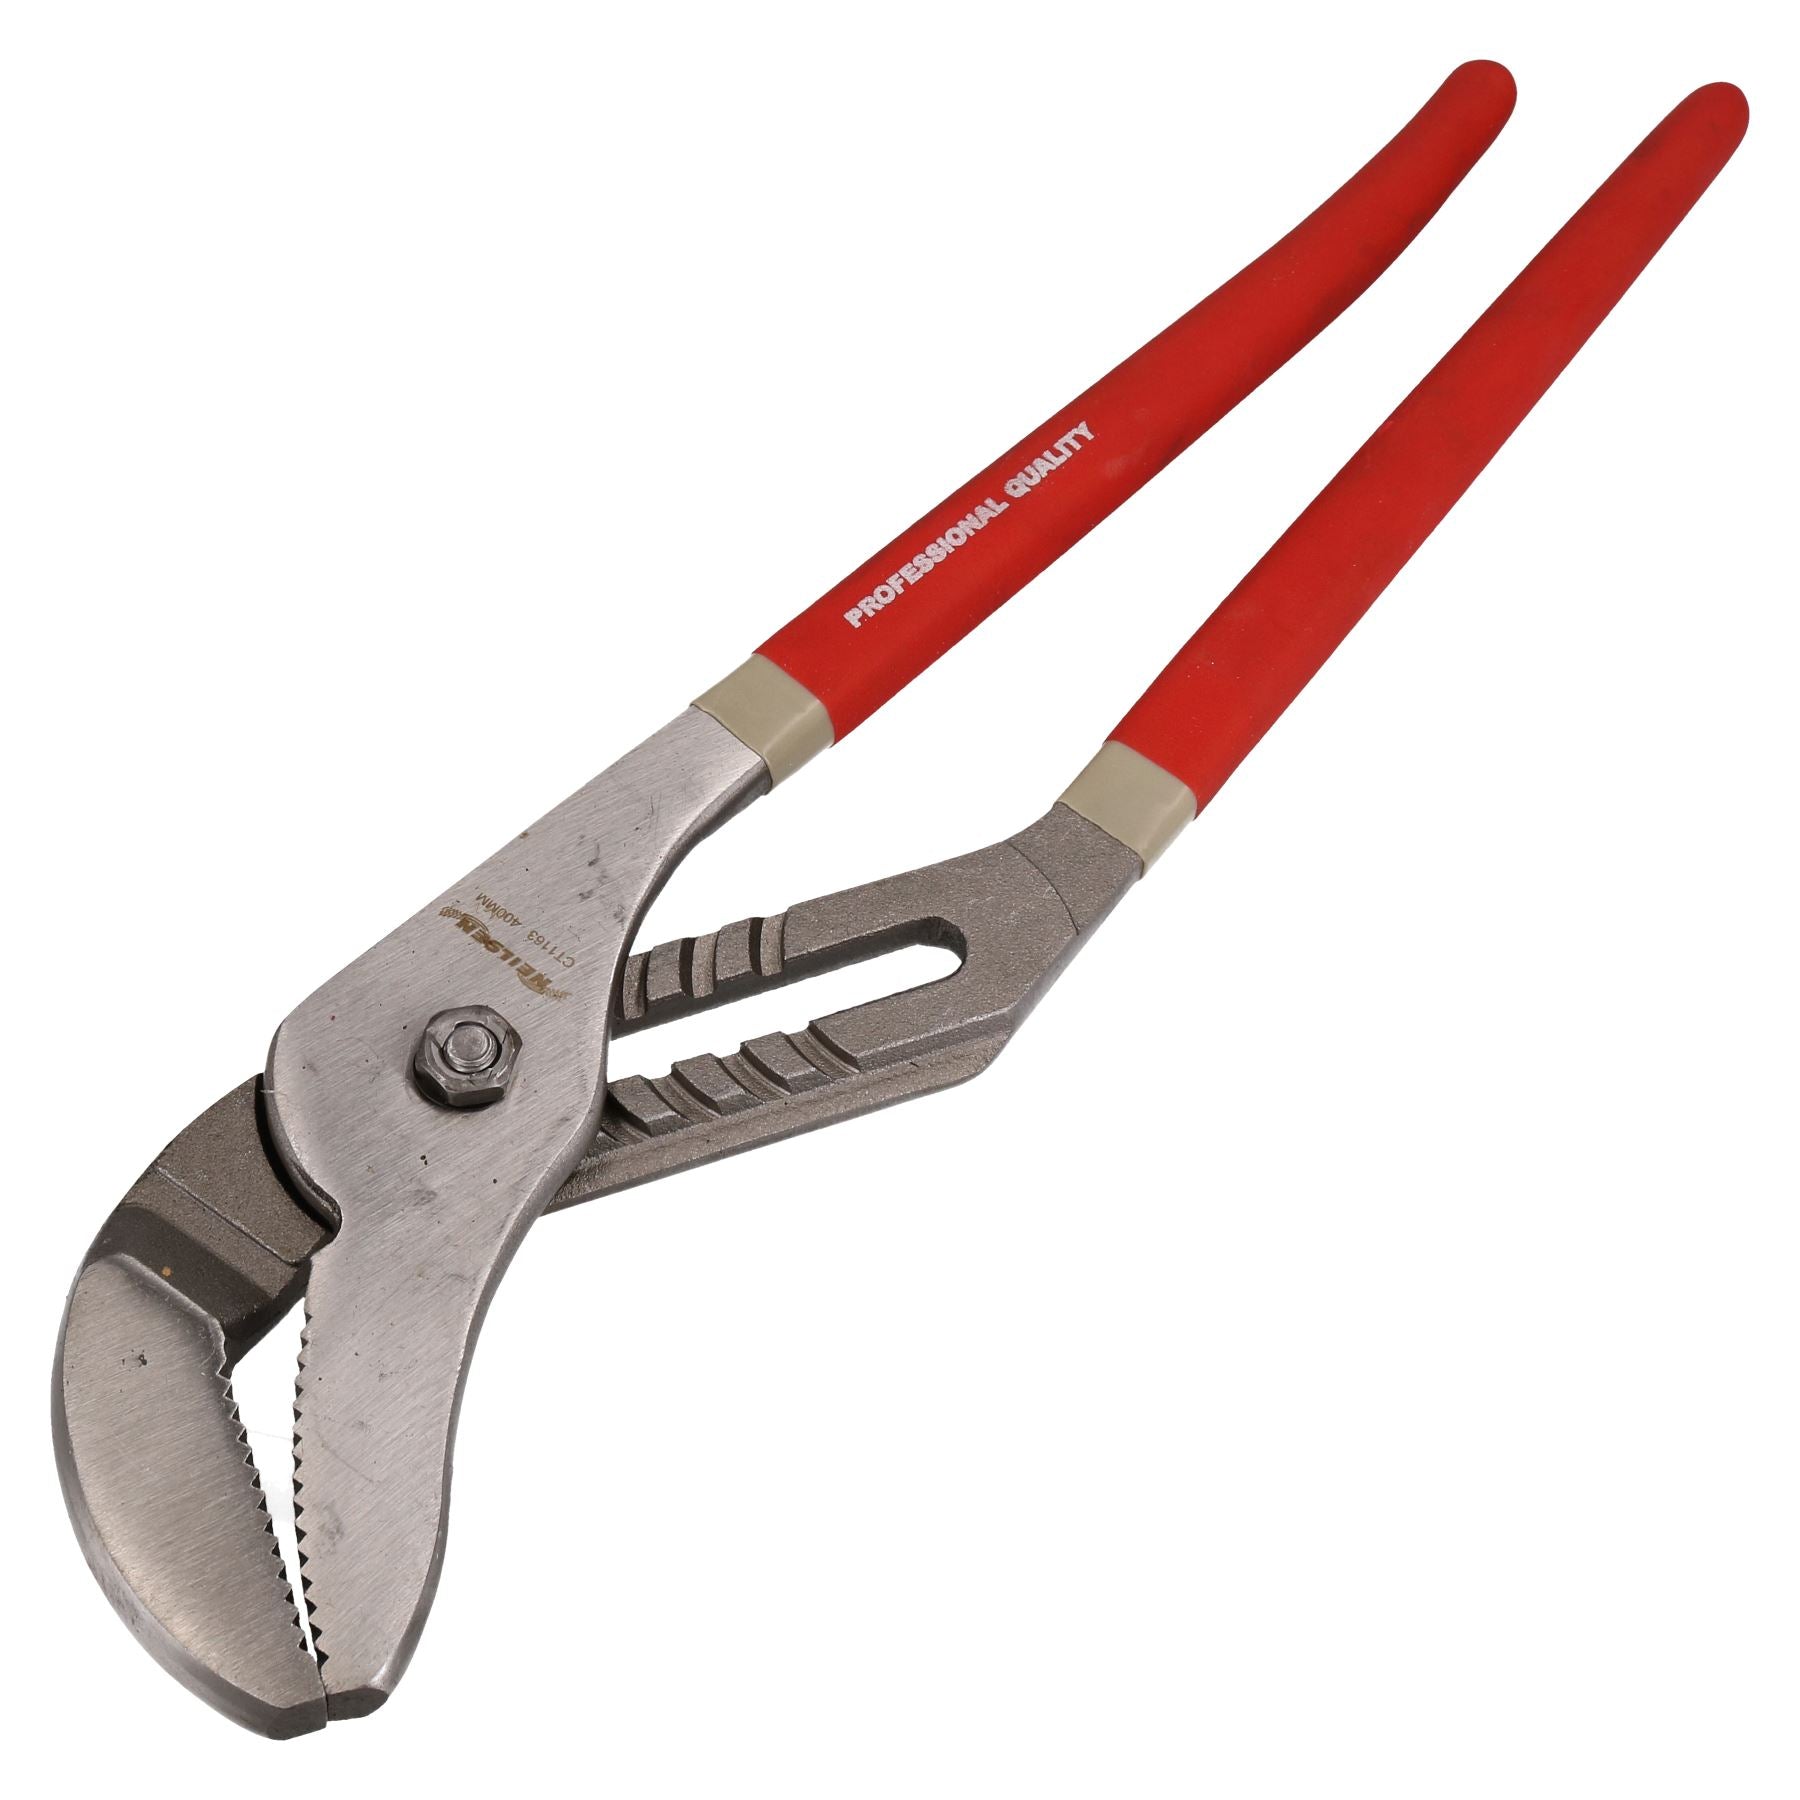 Water Pump Pliers Groove Joint Plier Plumbers Pipe Wrench Grips Gas 16" 410mm